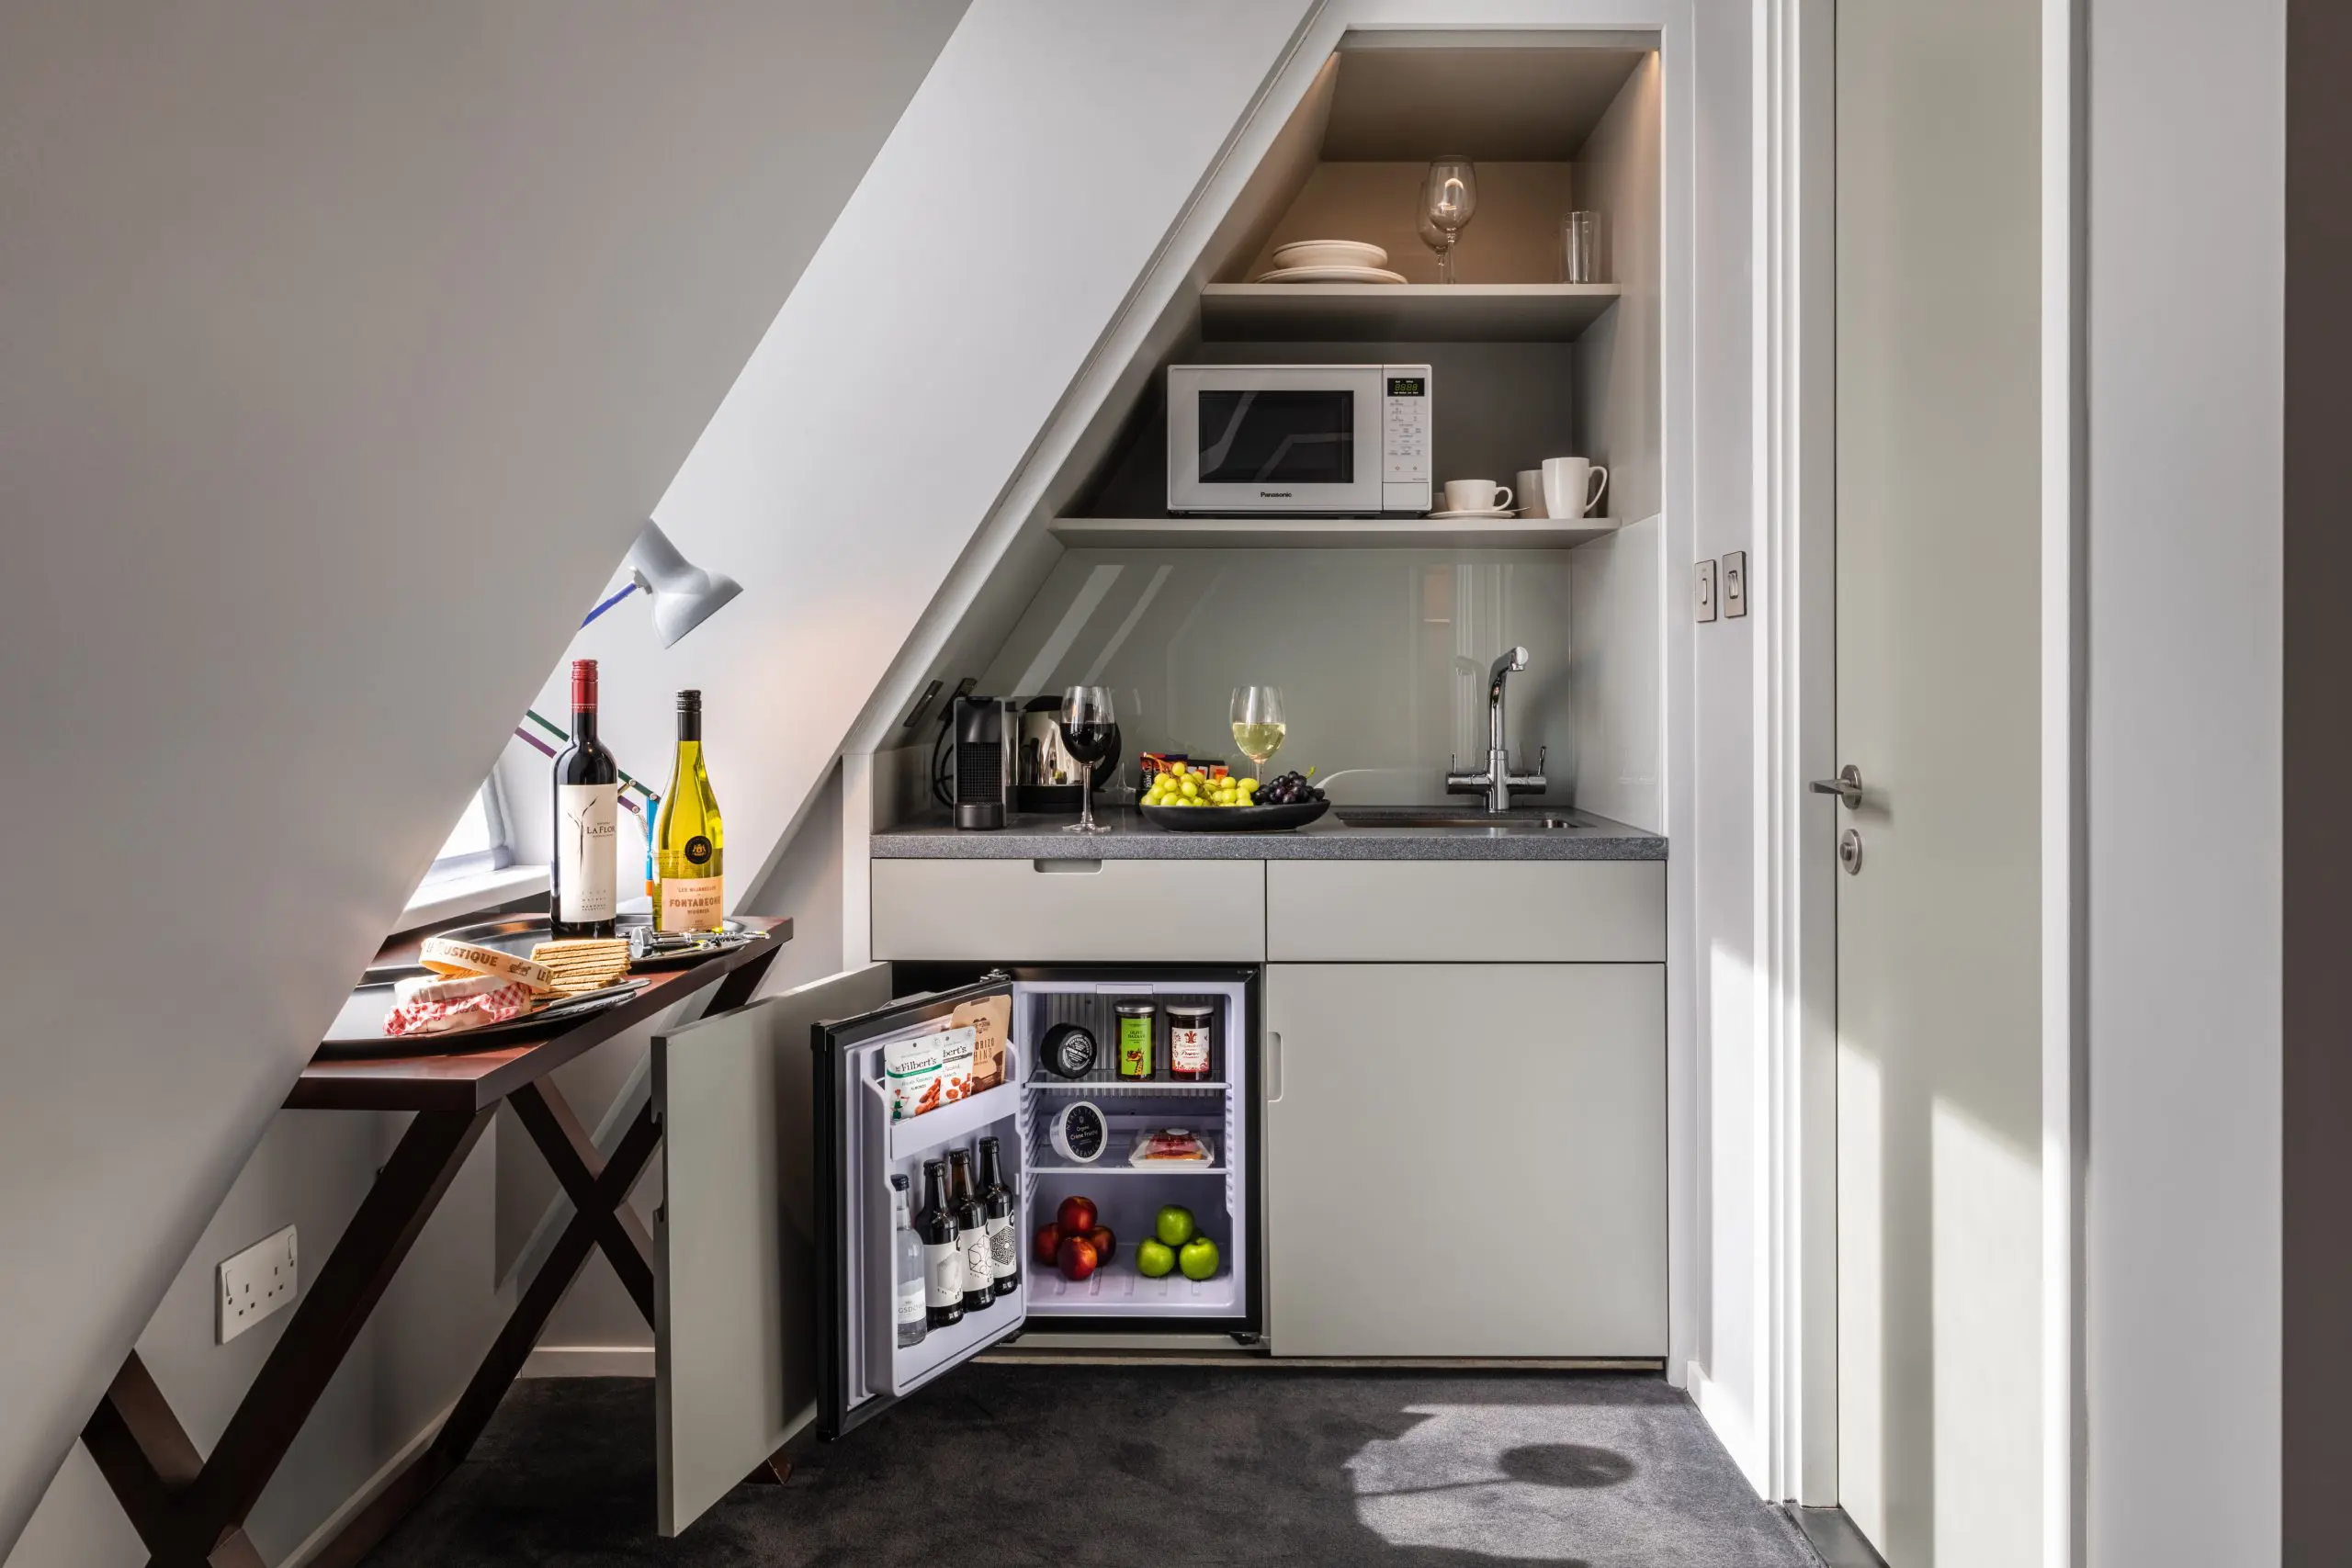 A miniture suite kitchen, with a small table, fridge and microwave.